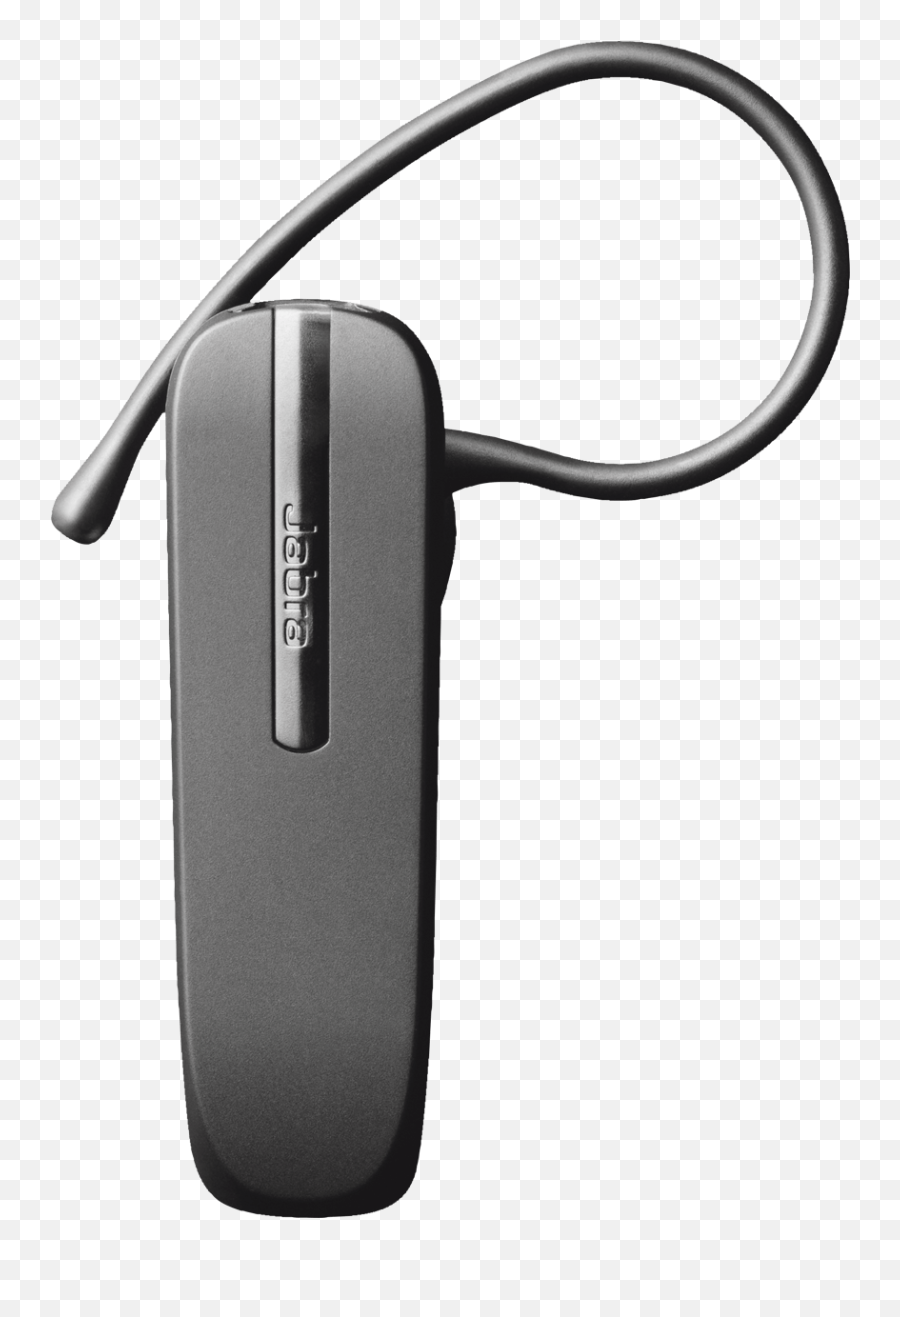 Jabra Bt2047 - Bluetooth Headset For Mobile Devices Bluetooth Headphones Low Price Png,Bluetooth Png